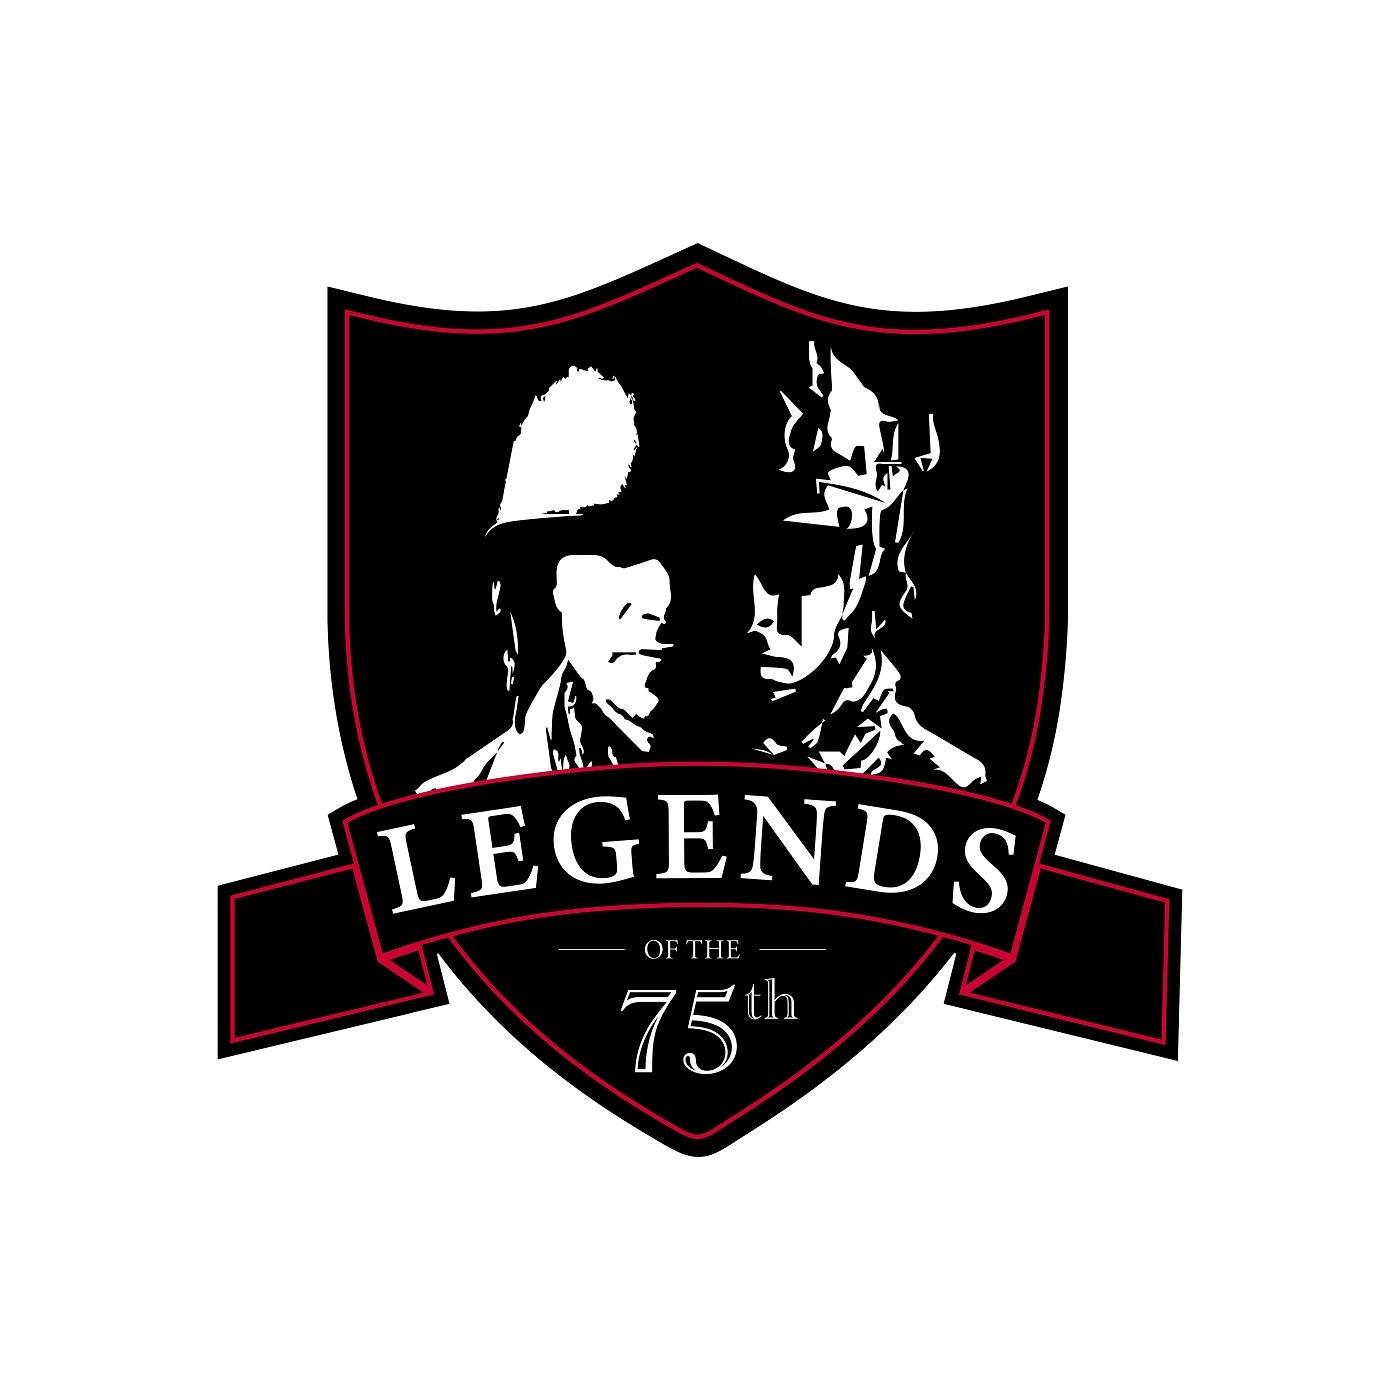 Legends of the 75th